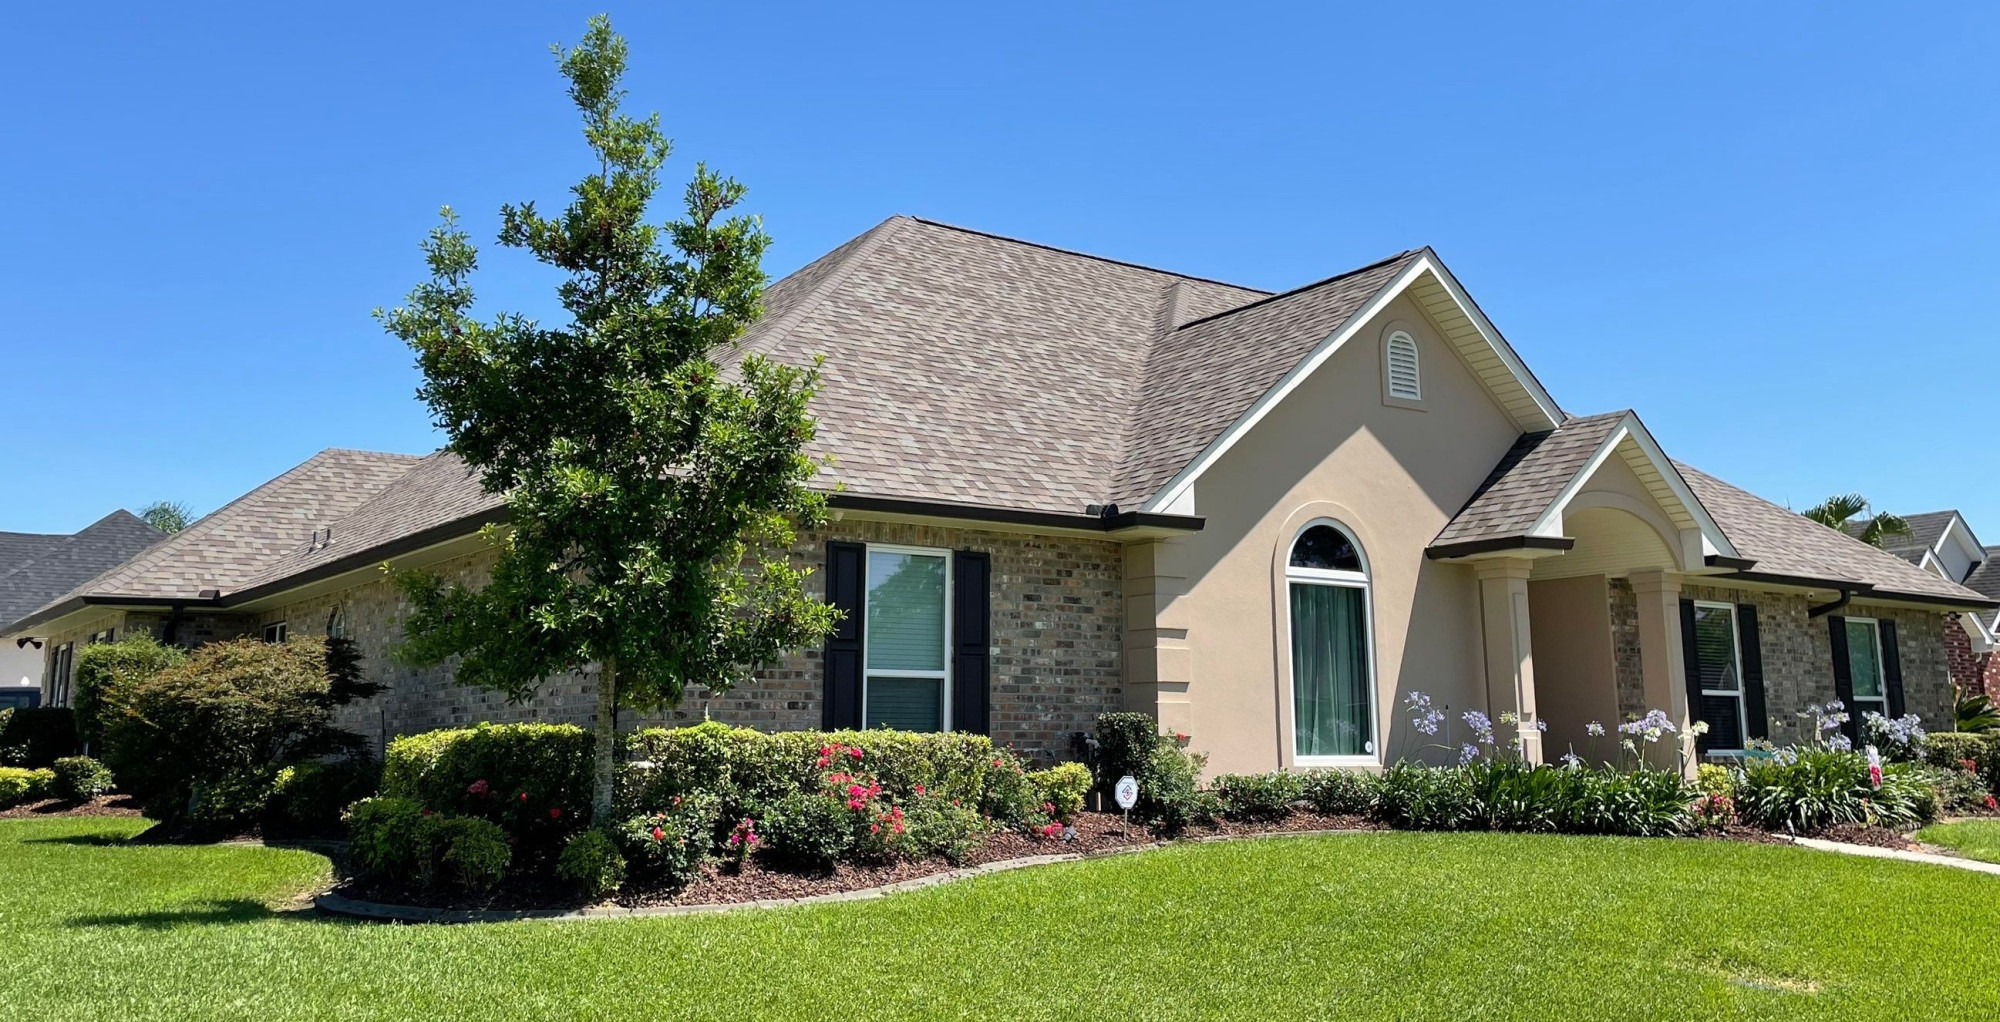 Roofing Services in New Orleans, LA